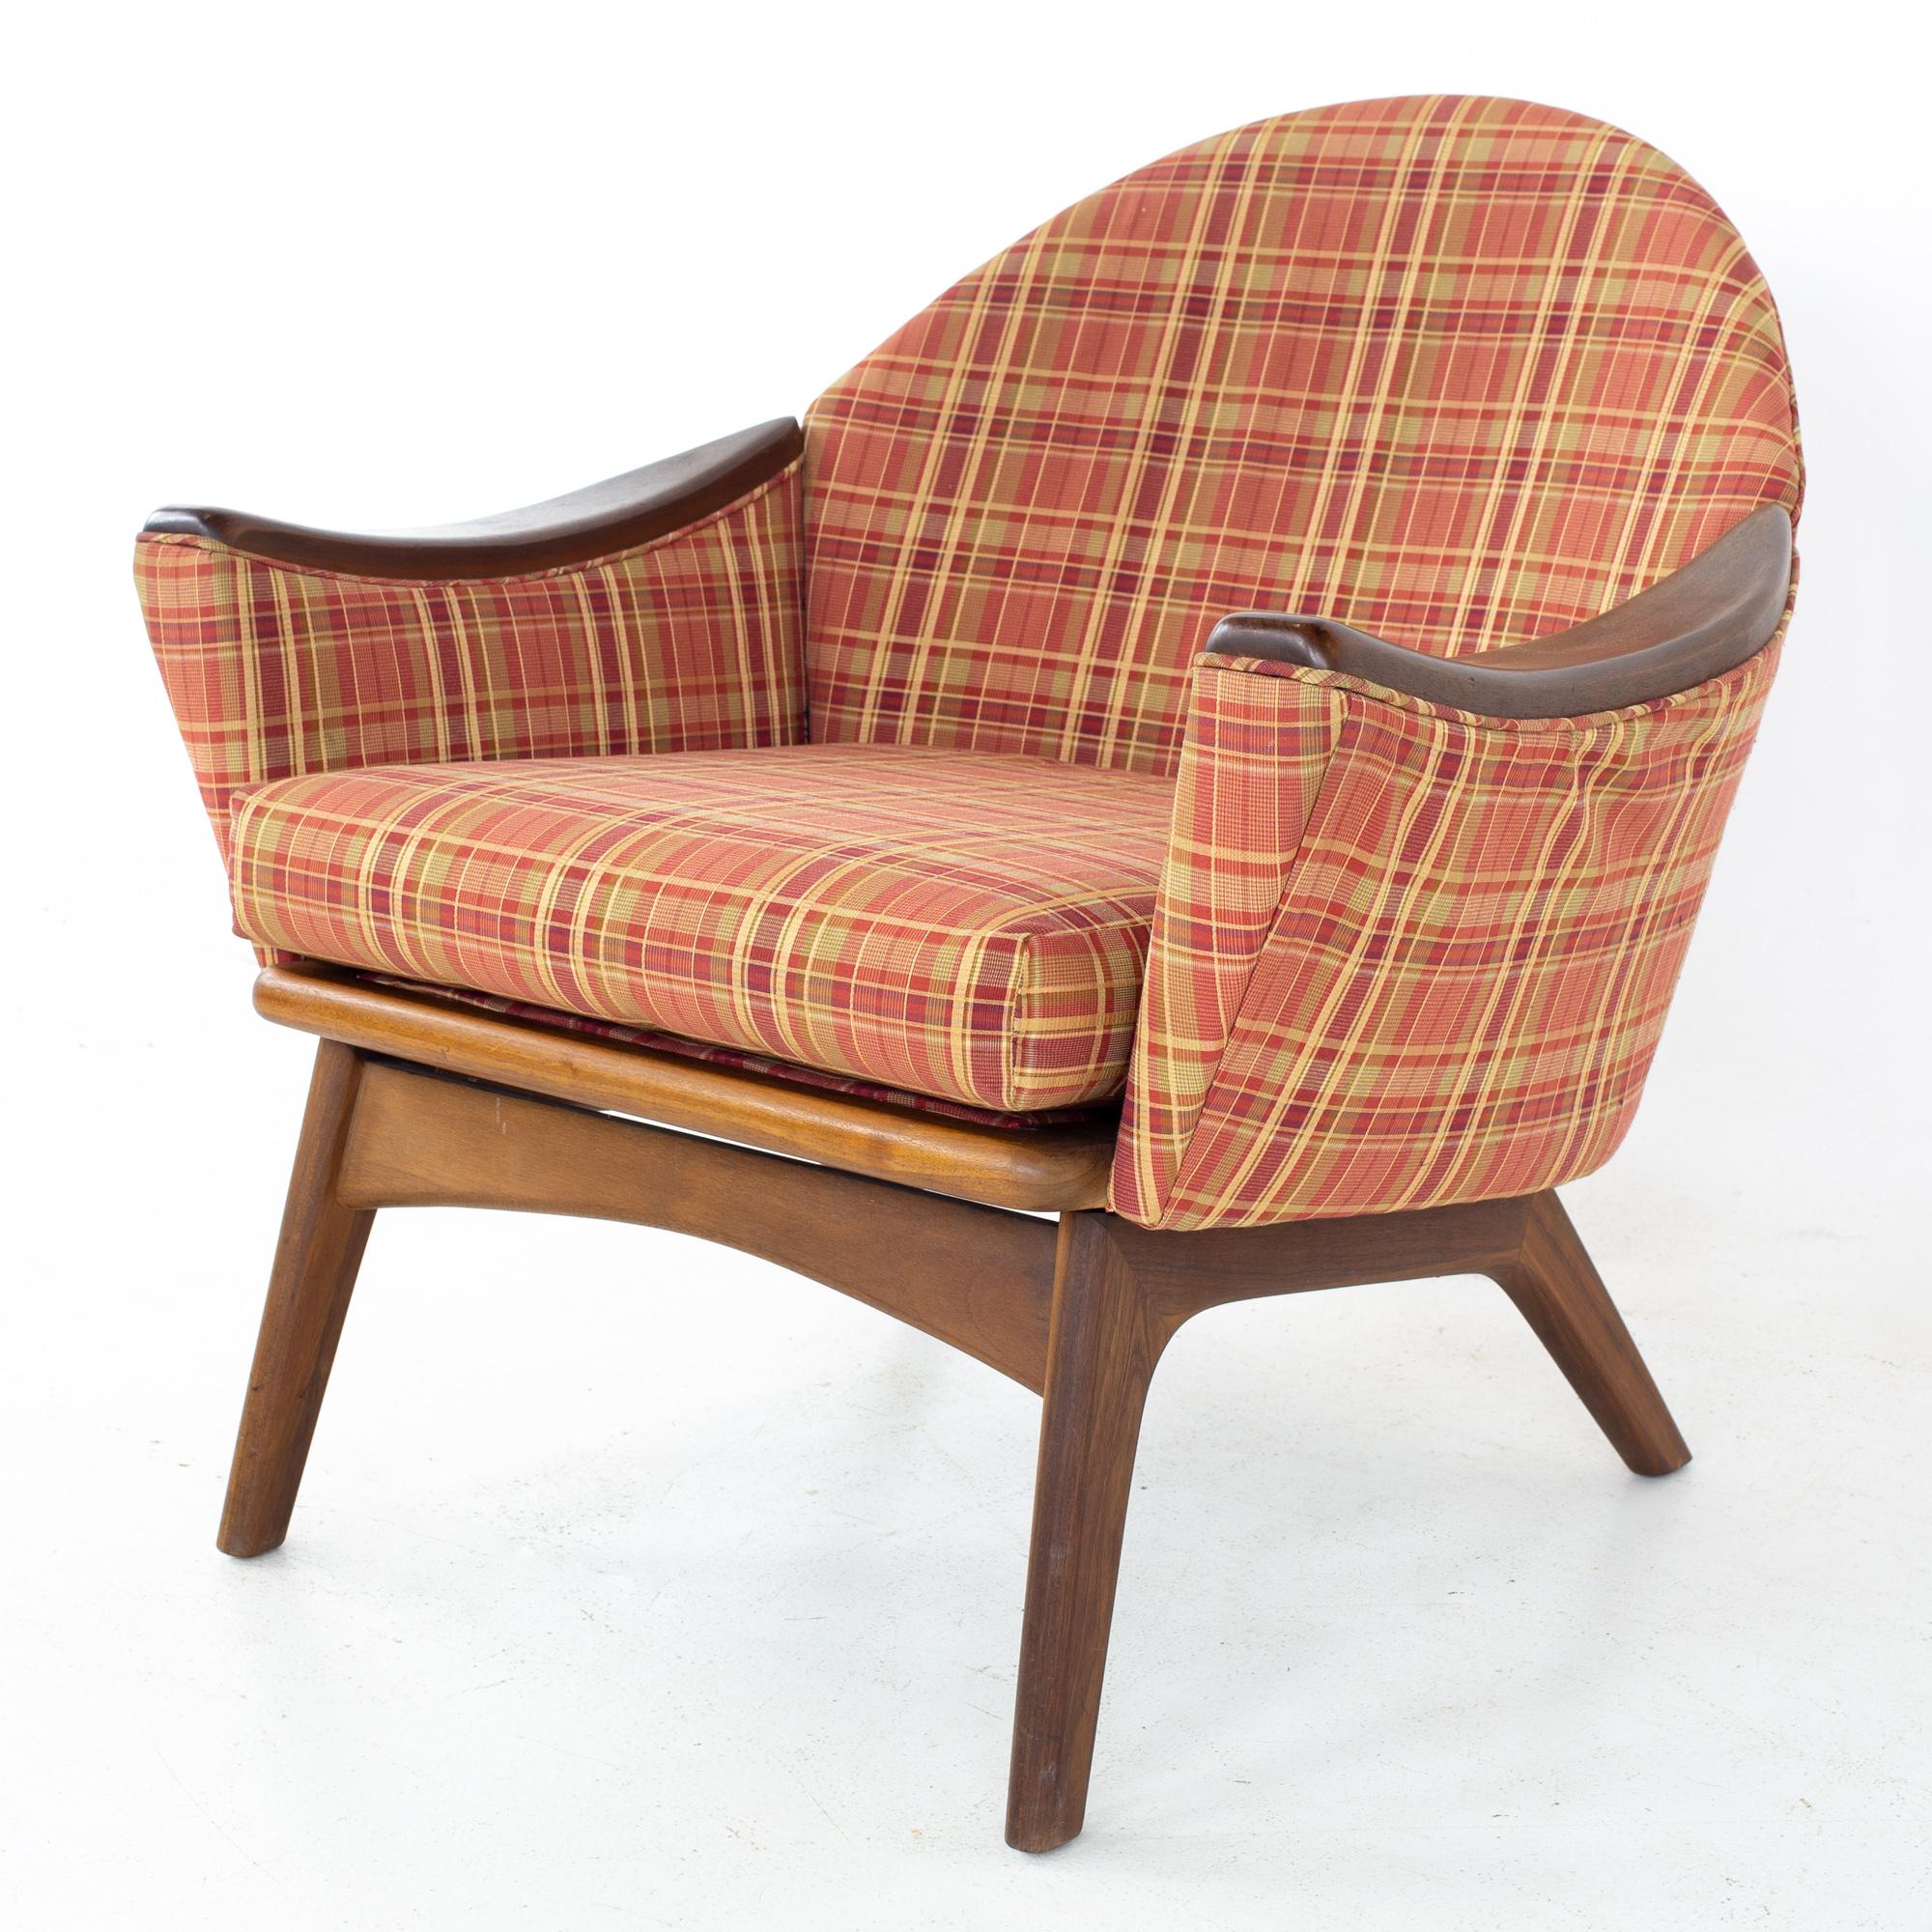 Adrian Pearsall for Craft Associates 1806-C Mid Century Lowback Walnut Lounge Chair
Lounge chair measures: 30 wide x 25.5 deep x 29 high, with a seat height of 16 inches and arm height of 21.5 inches

All pieces of furniture can be had in what we